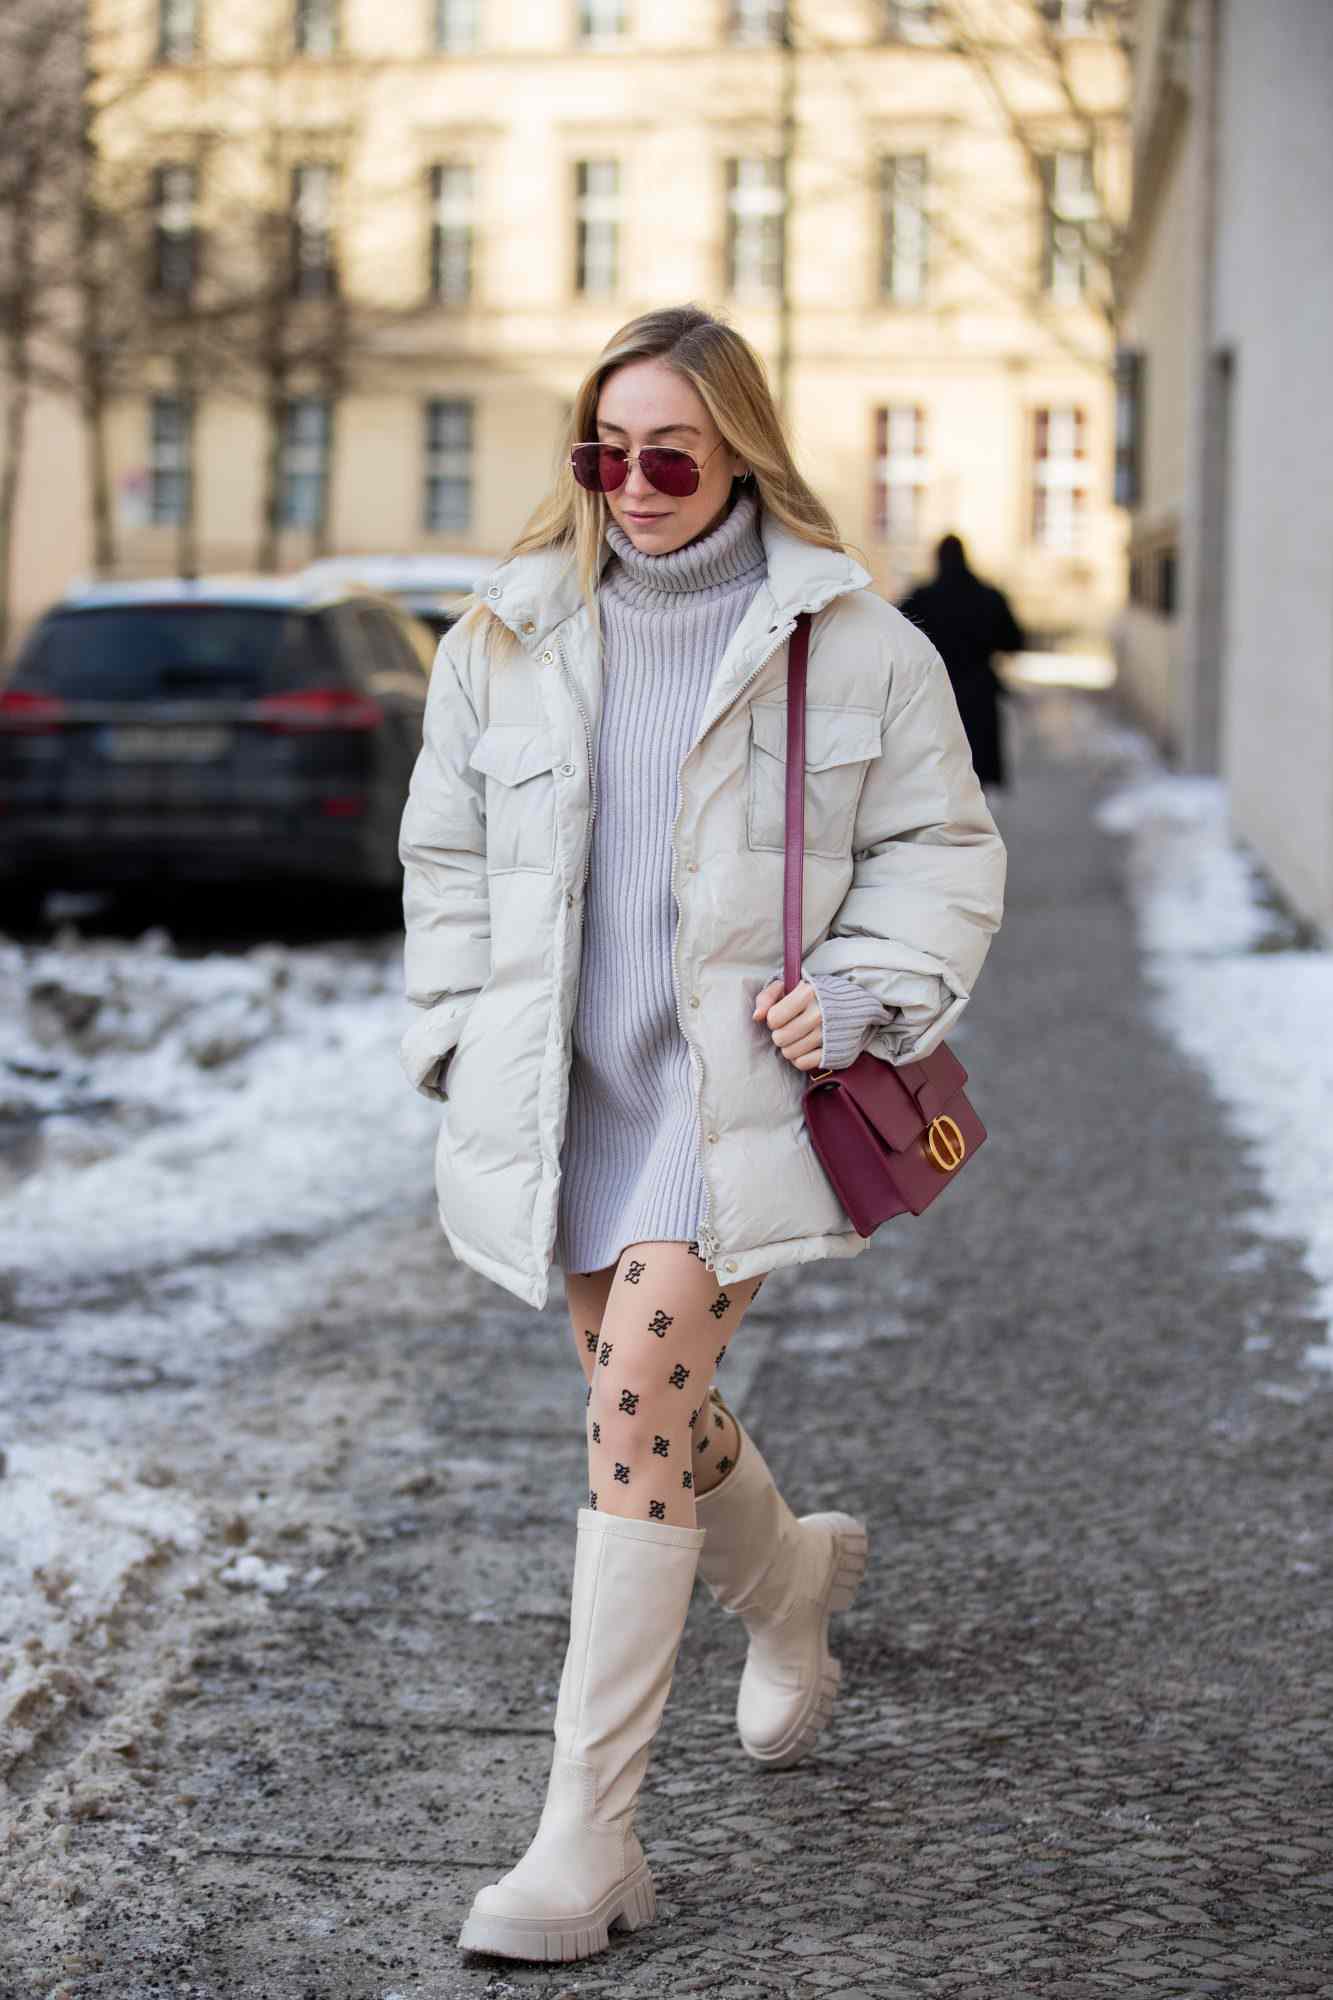 8 Winter Outfits Professional Stylists Can't Wait to Put Together This Season